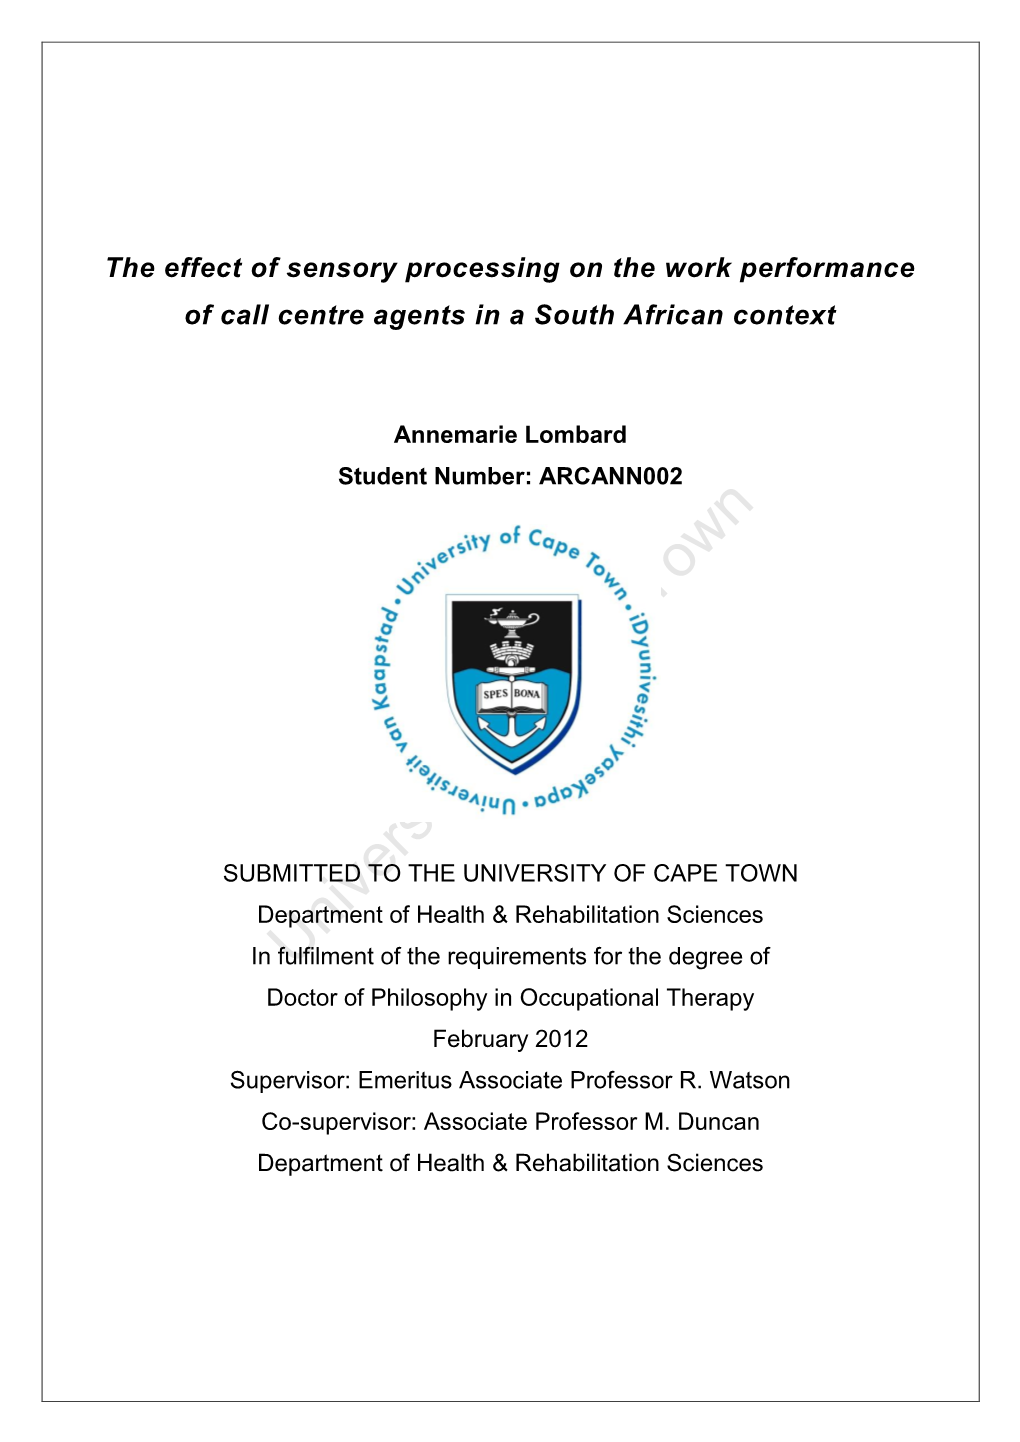 The Effect of Sensory Processing on the Work Performance of Call Centre Agents in a South African Context